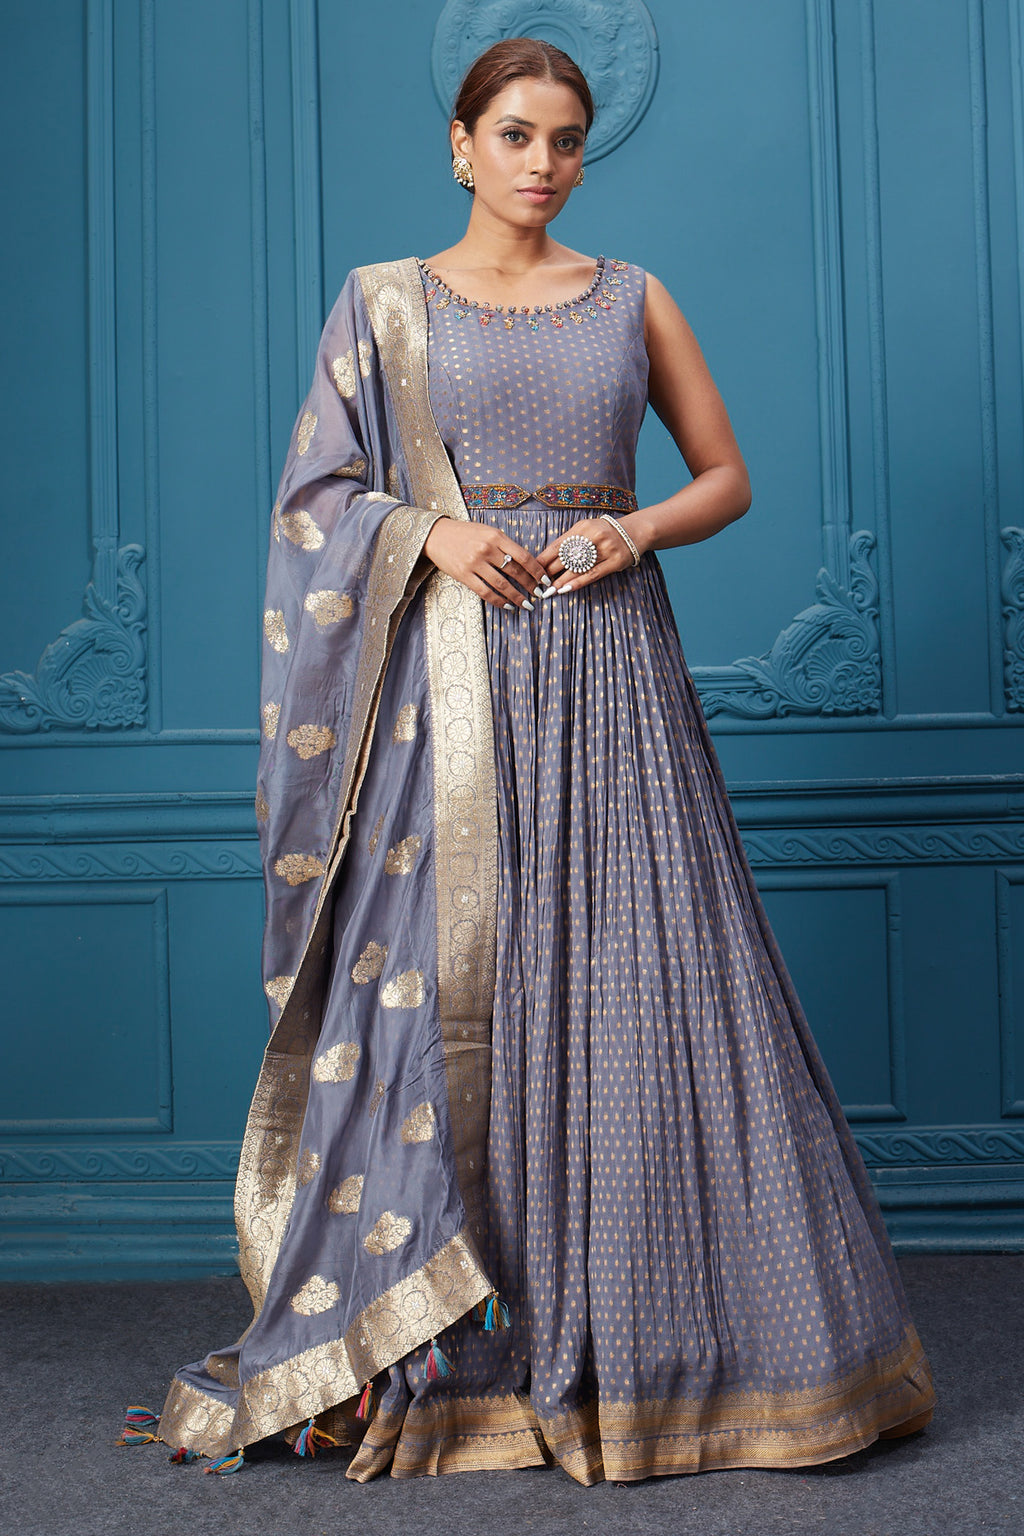 Buy a grey embroidered sleeveless Anarkali kurta featuring embroidery, and a grey dupatta with tassels. Dazzle on special occasions with exquisite Indian designer dresses, sharara suits, Anarkali suits, bridal lehengas, and sharara suits from Pure Elegance Indian clothing store in the USA. Shop online from Pure Elegance.